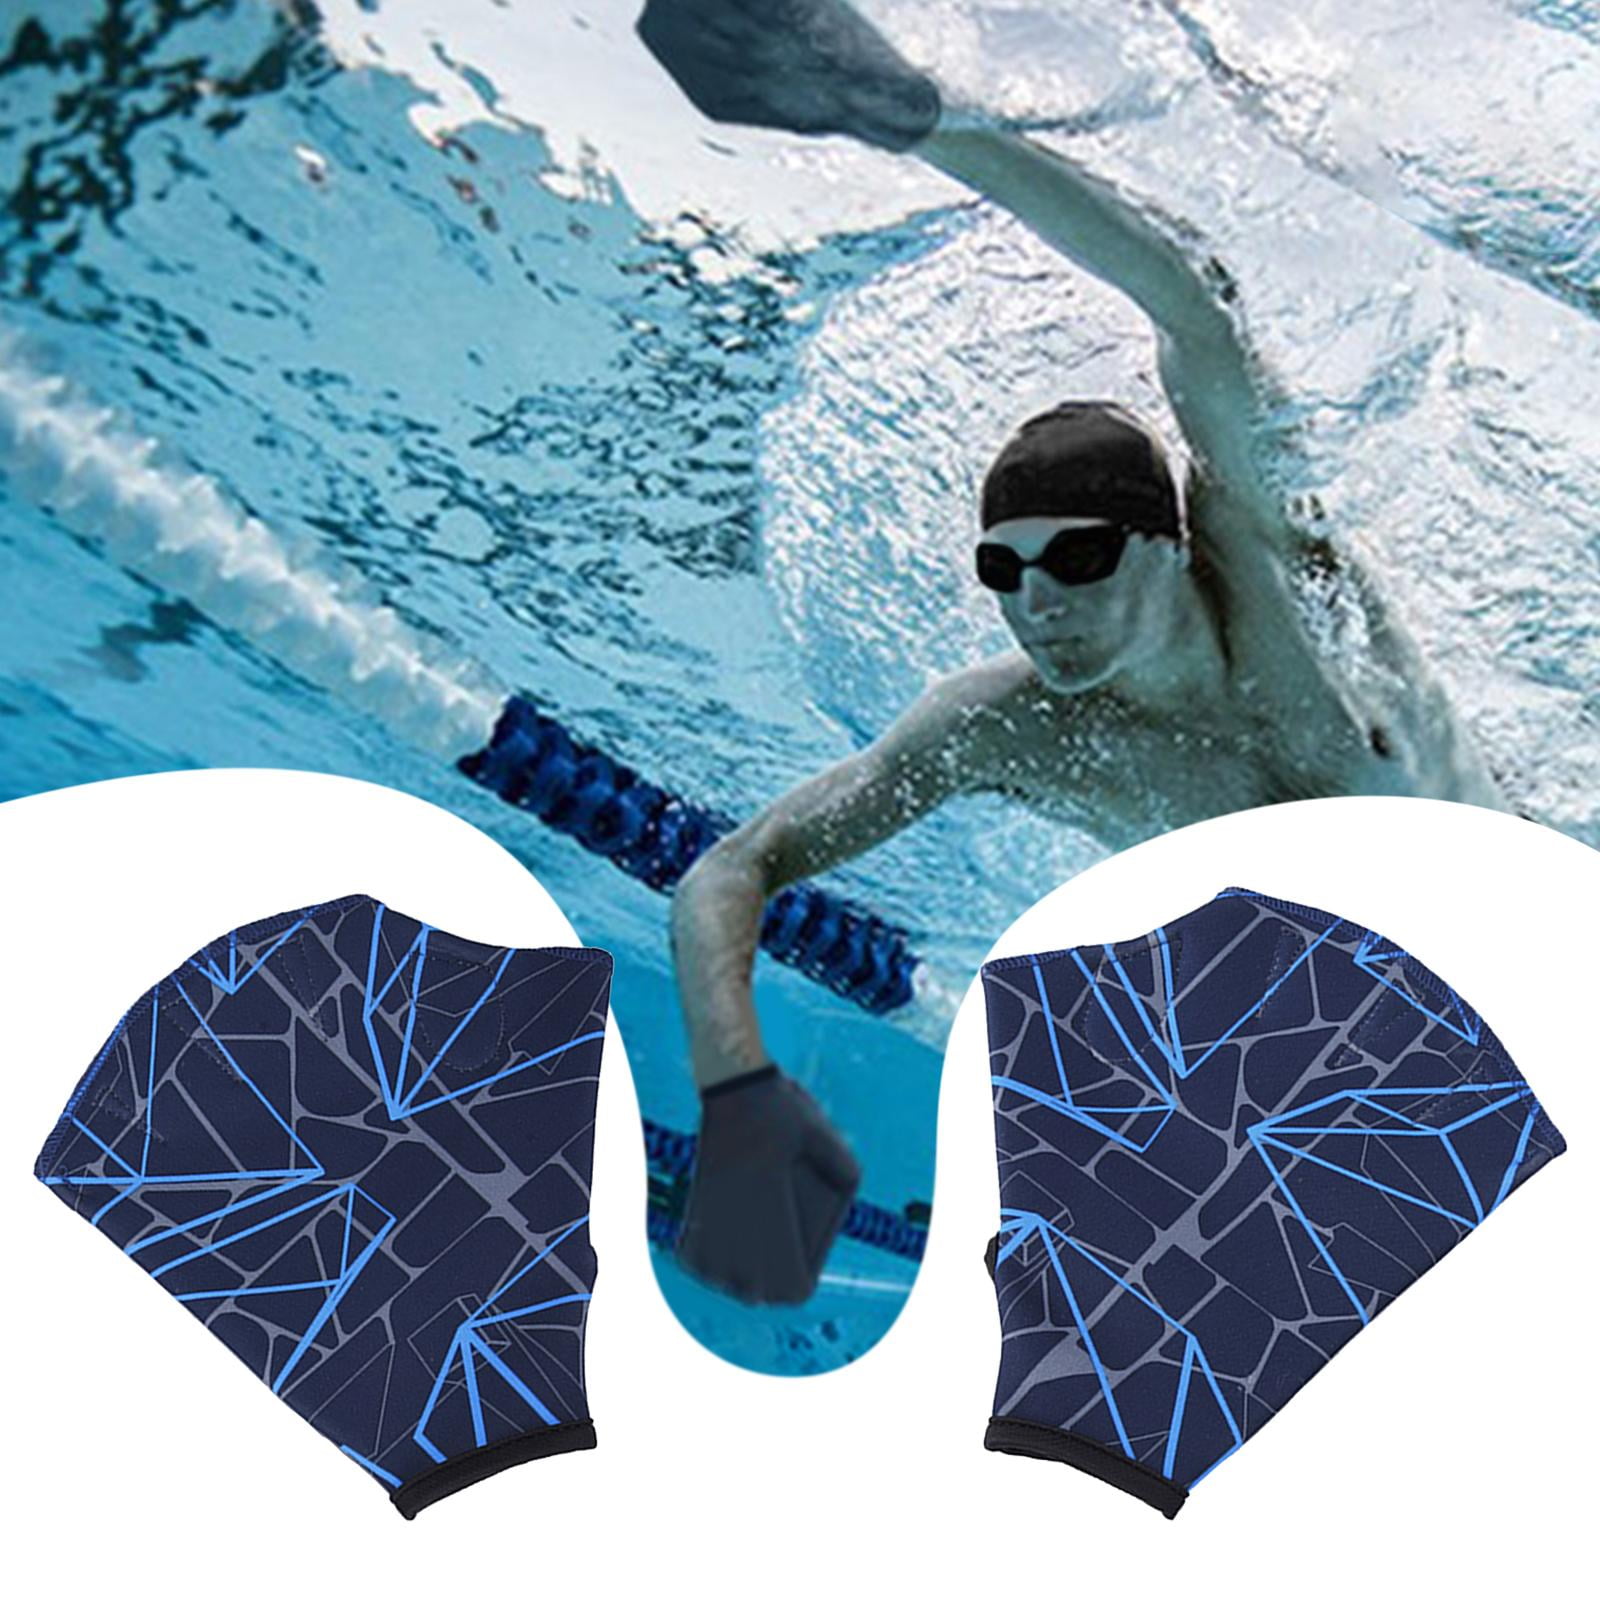 ATYAIDE 1Pair Silicone Swim Gloves Webbed Aquatic Training Water Resistance Fitness Paddle Aerobics for Men Women Adult 